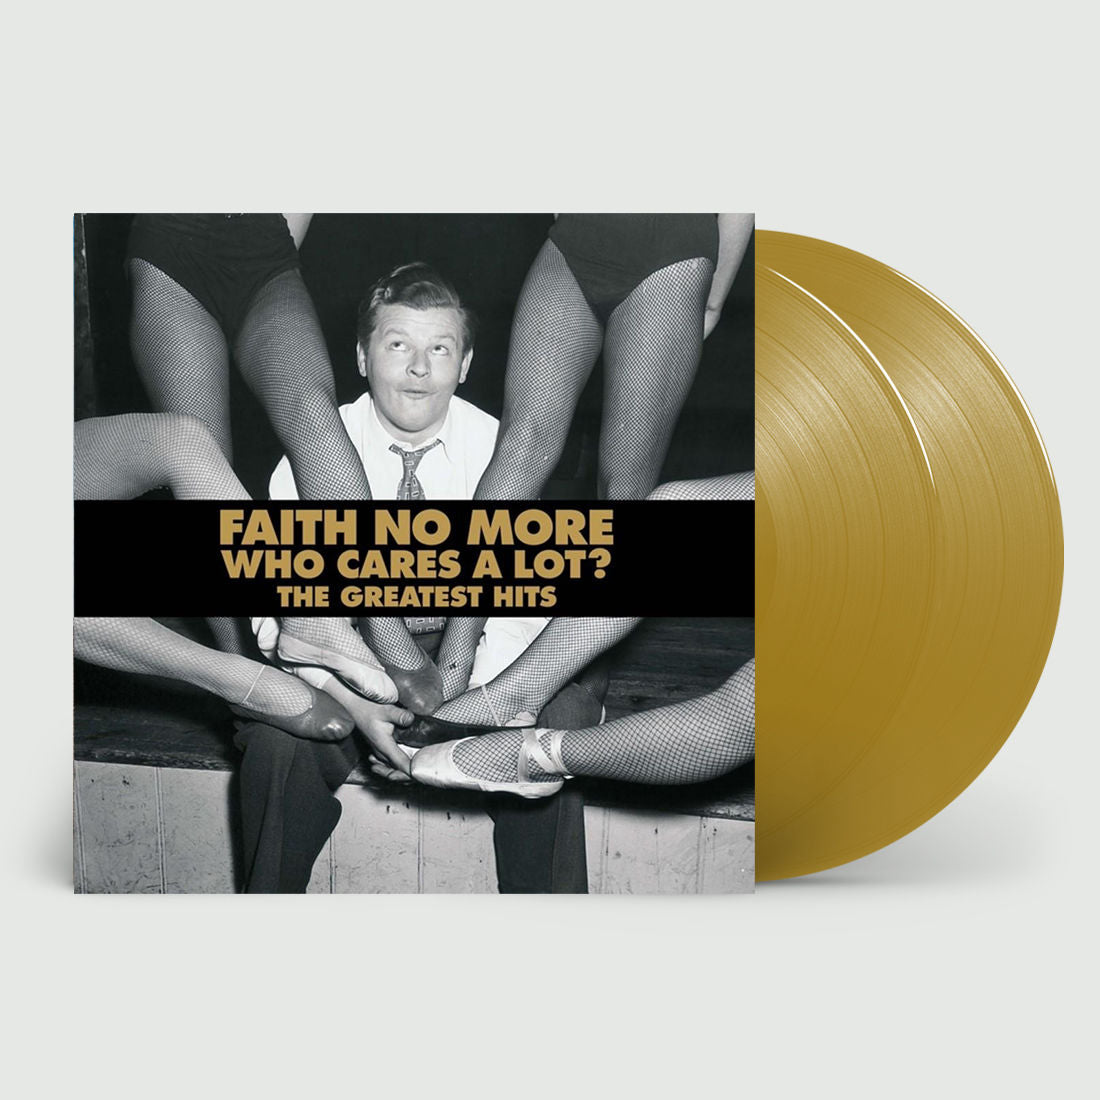 Faith No More - Who Cares A Lot? (The Greatest Hits): Limited Gold Vinyl 2LP